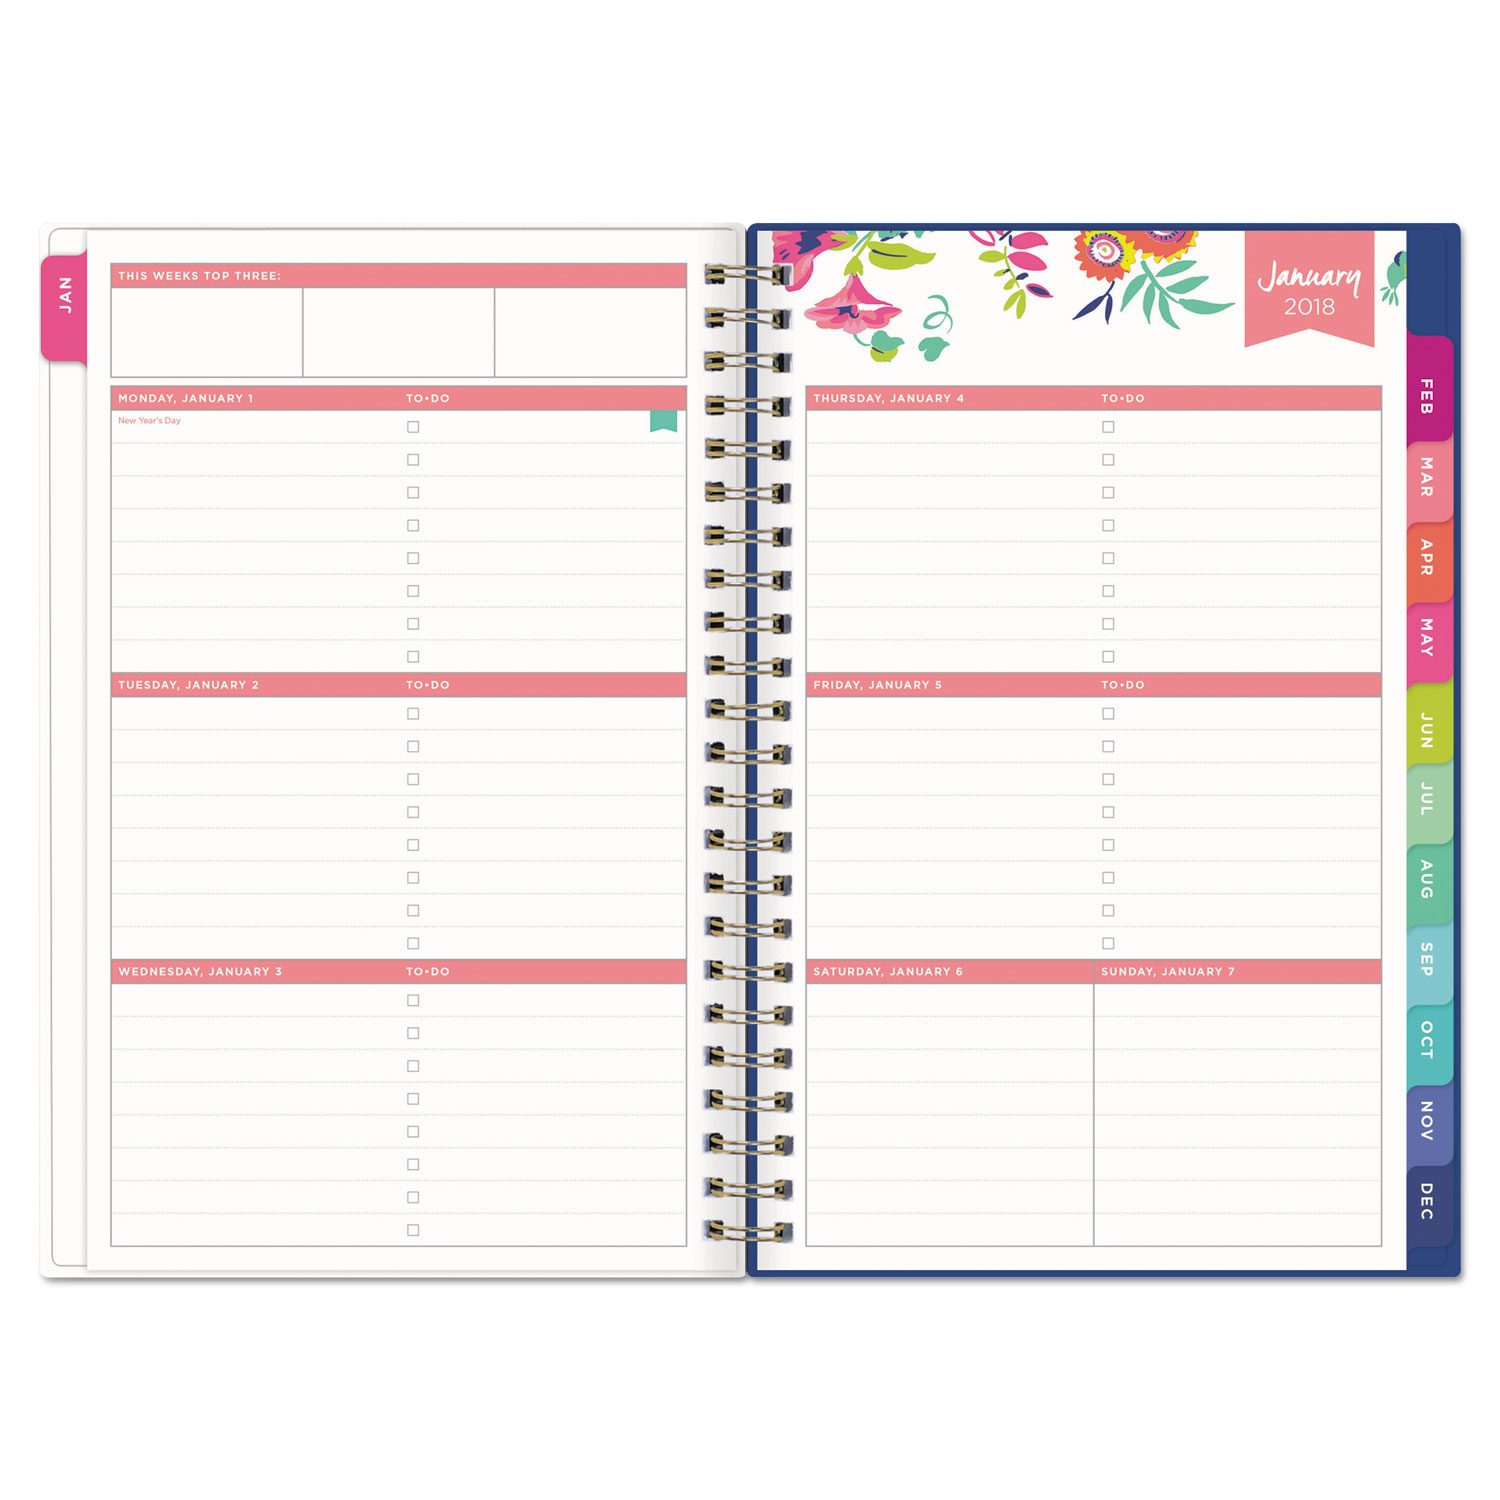 Day Designer CYO Weekly/Monthly Planner, 5 x 8, Navy/Floral, 2018